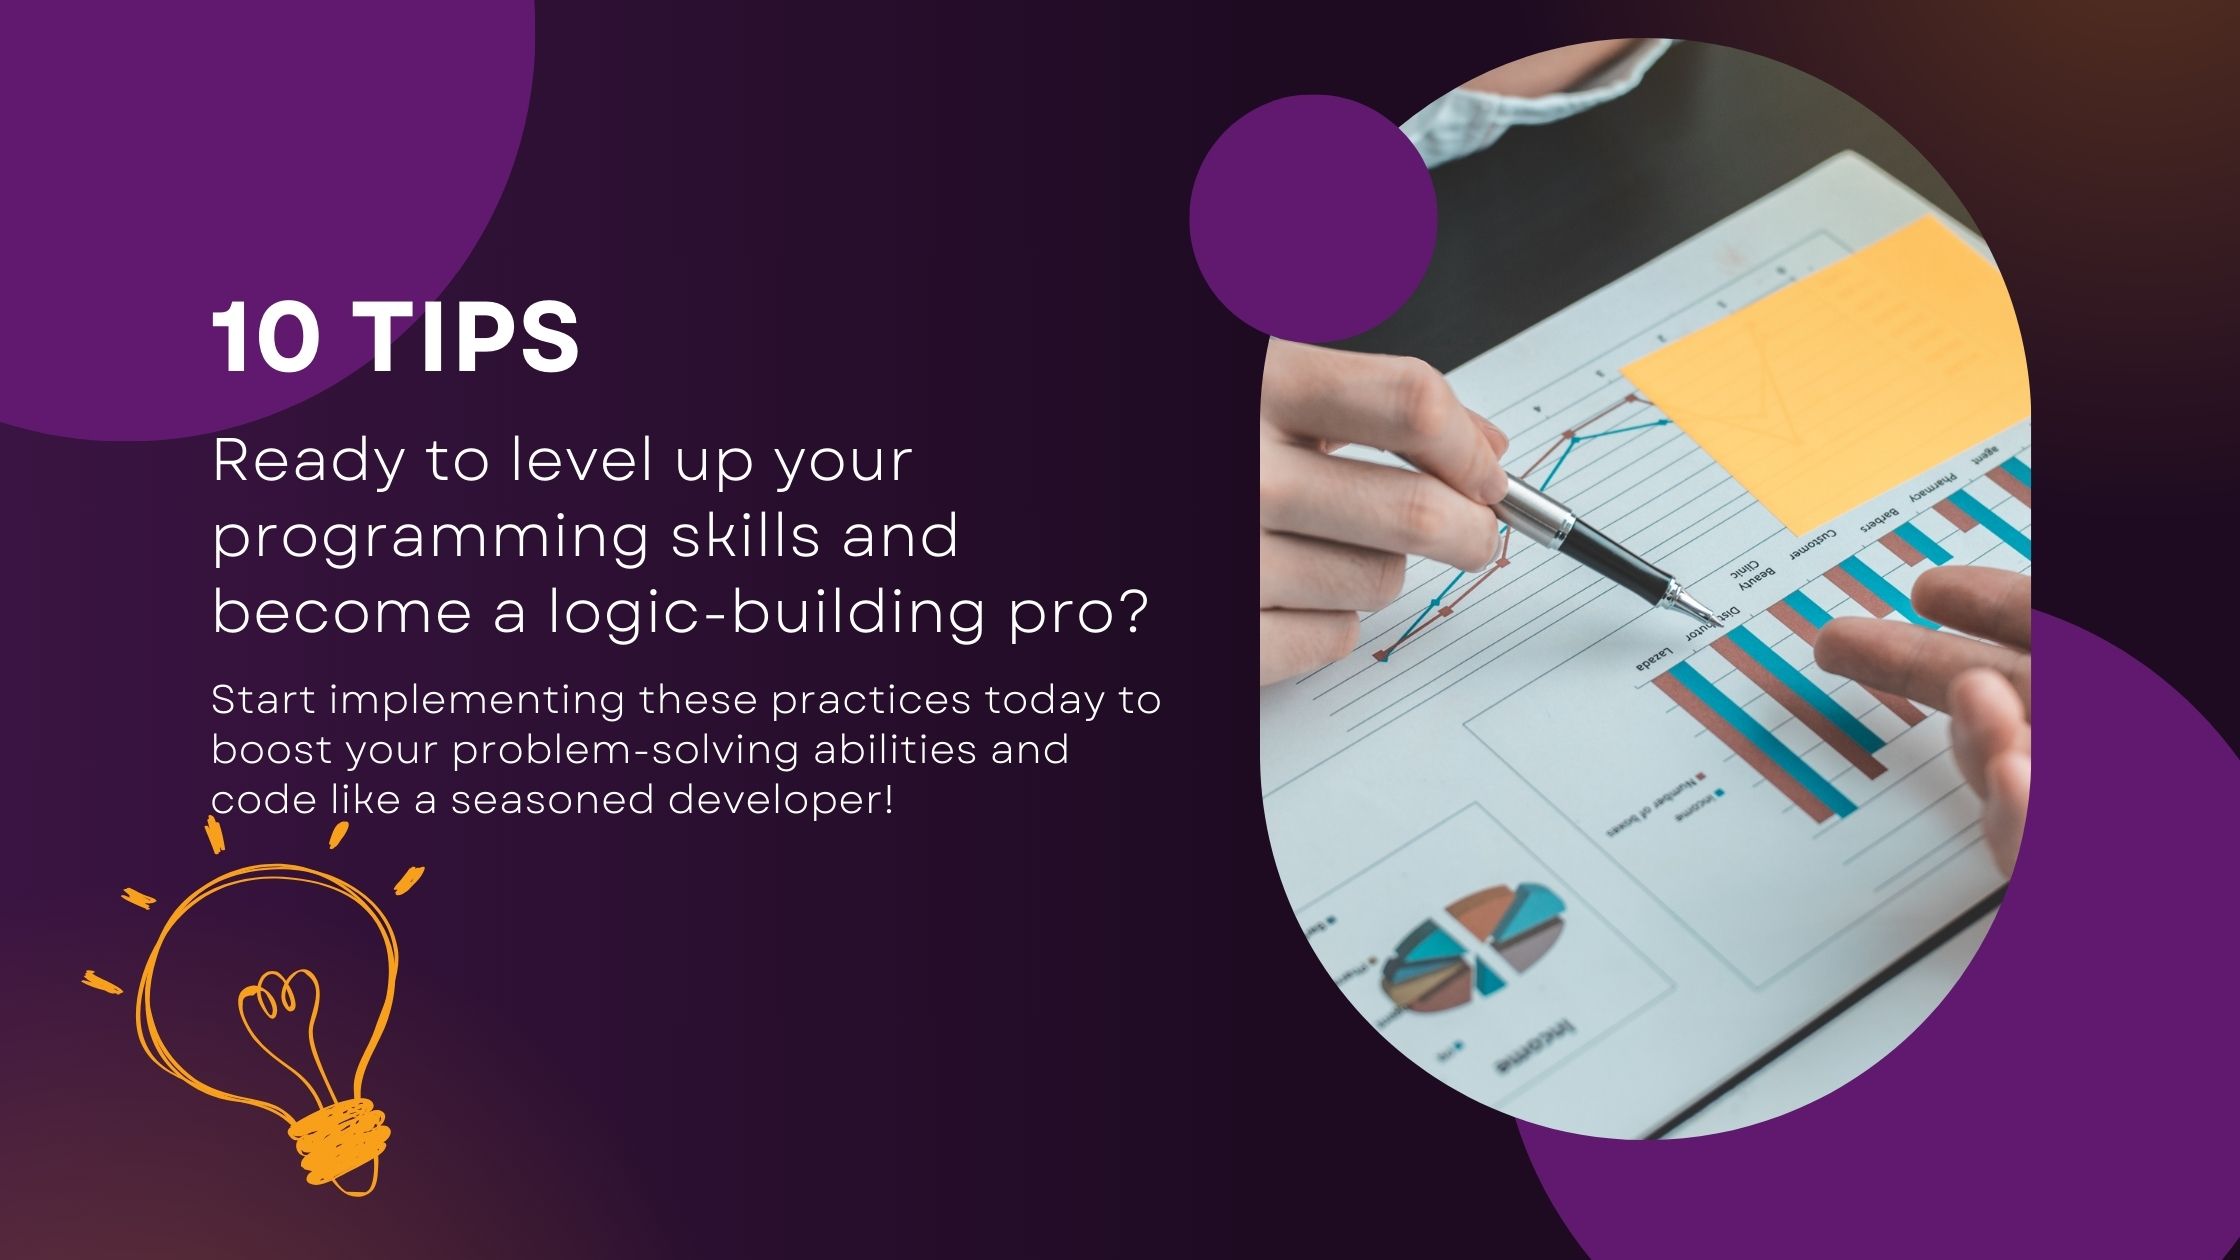 Ready to level up your programming skills and become a logic-building pro v2